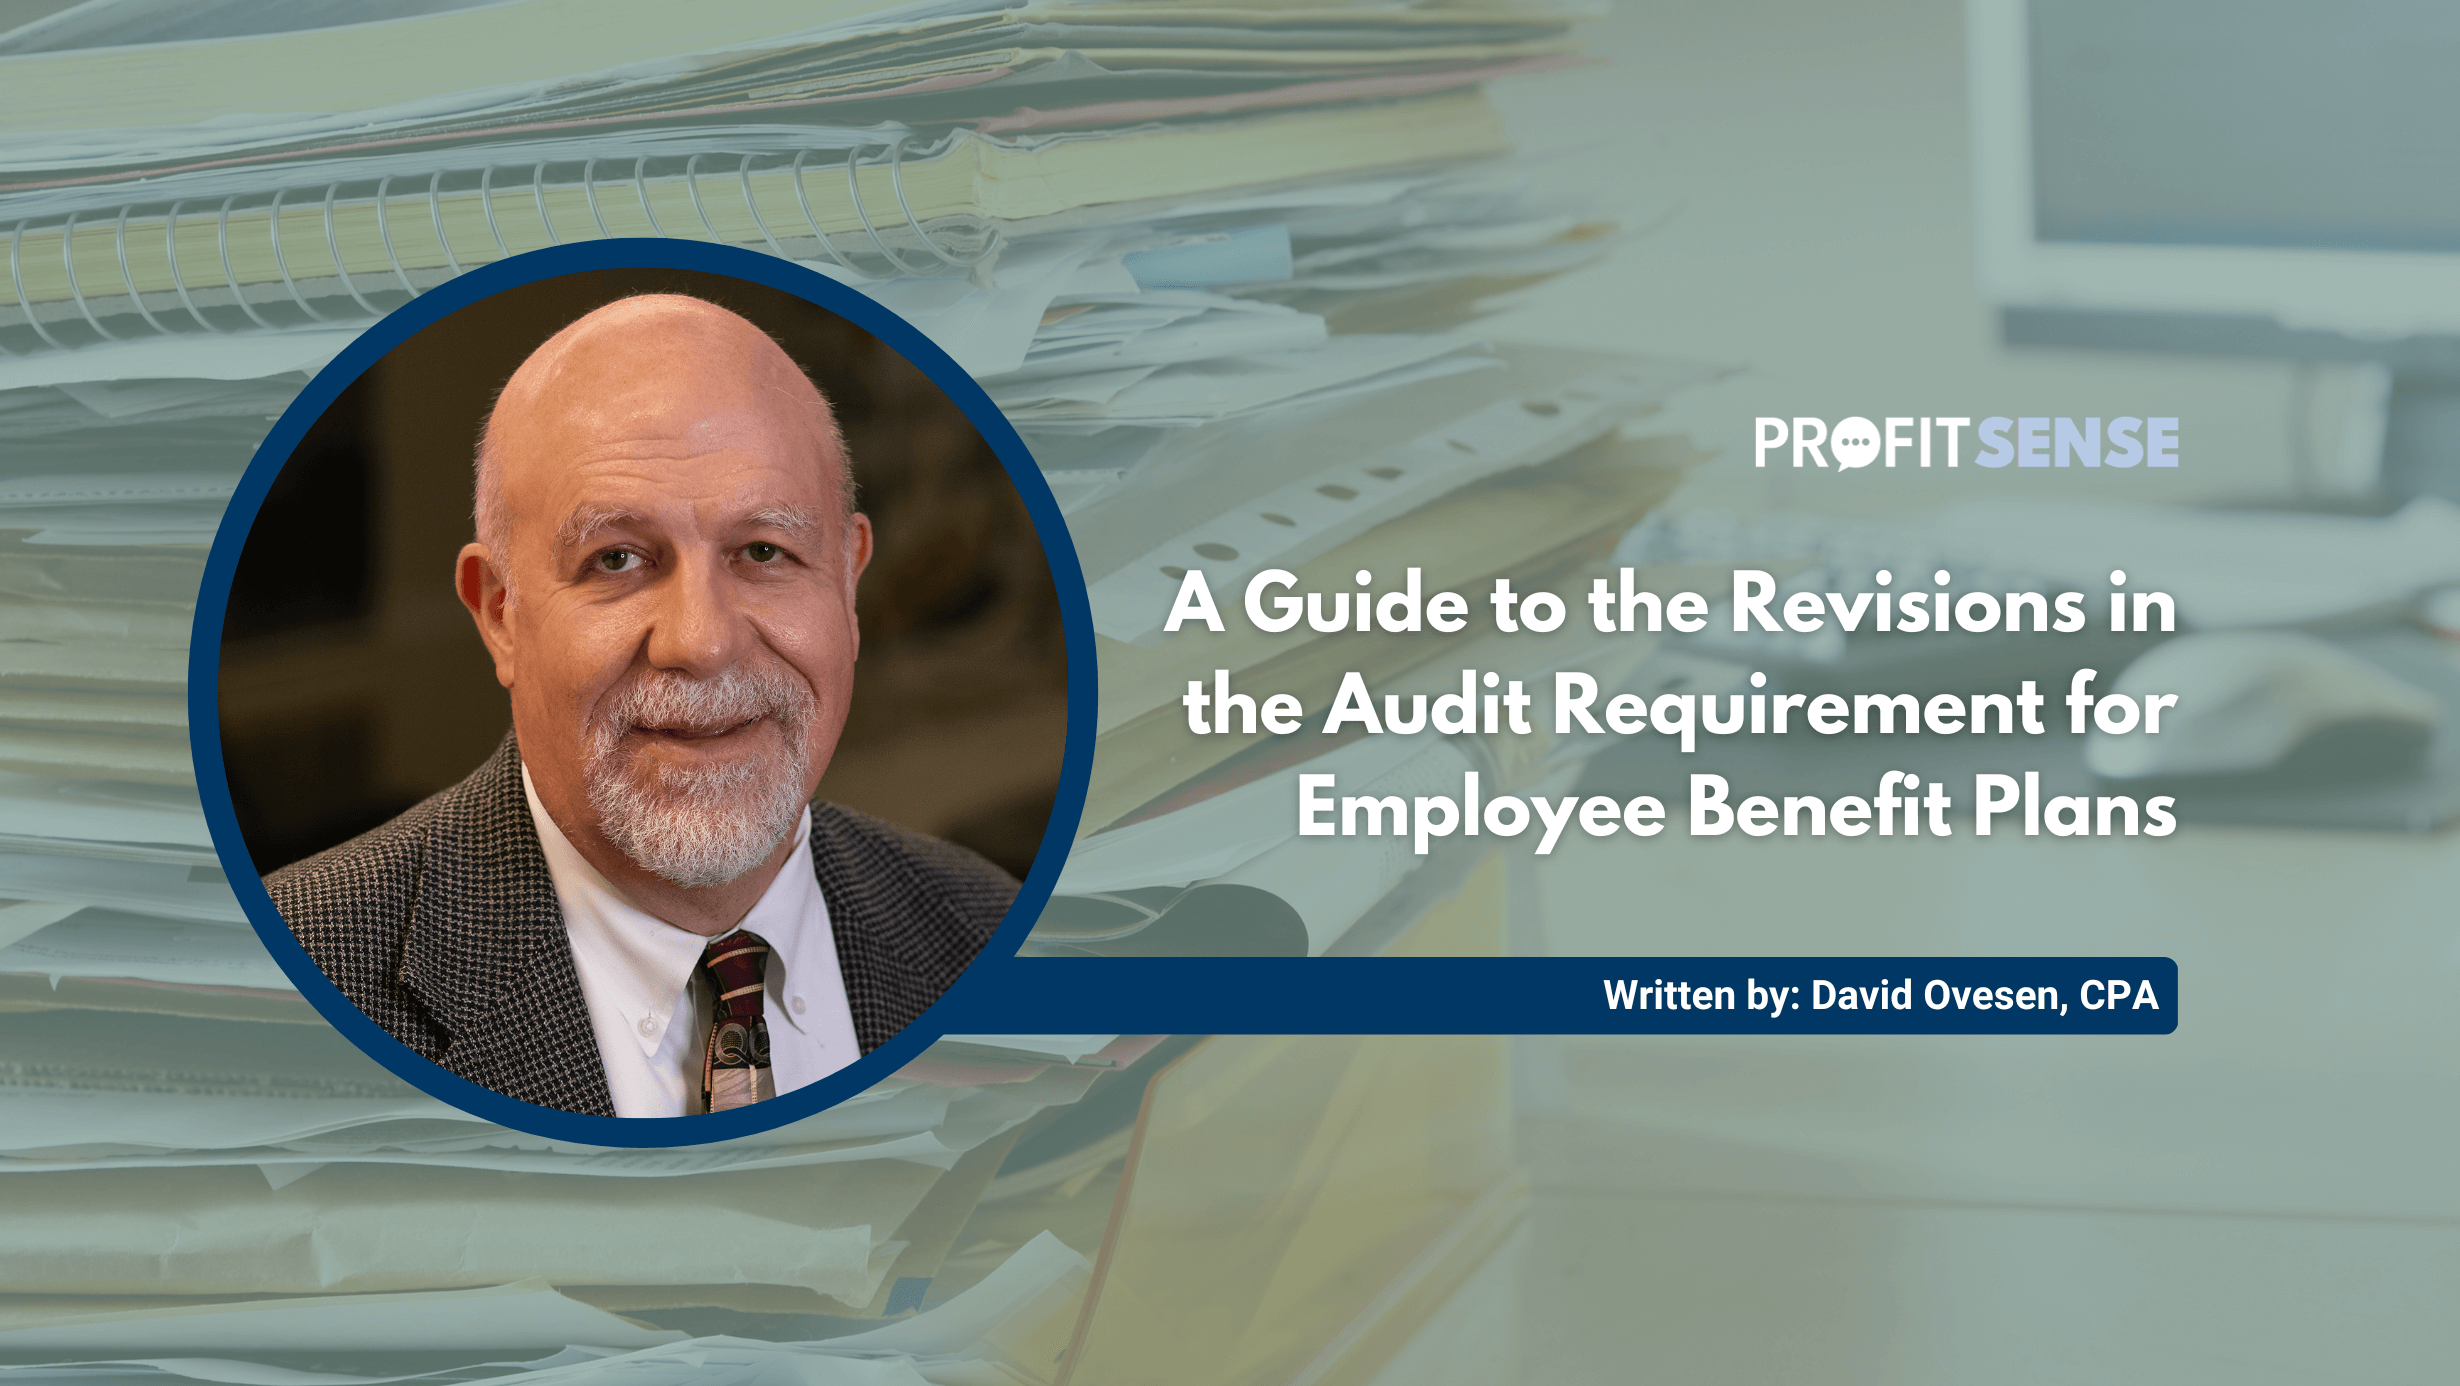 A Guide to the Revisions in the Audit Requirement for Employee Benefit Plans